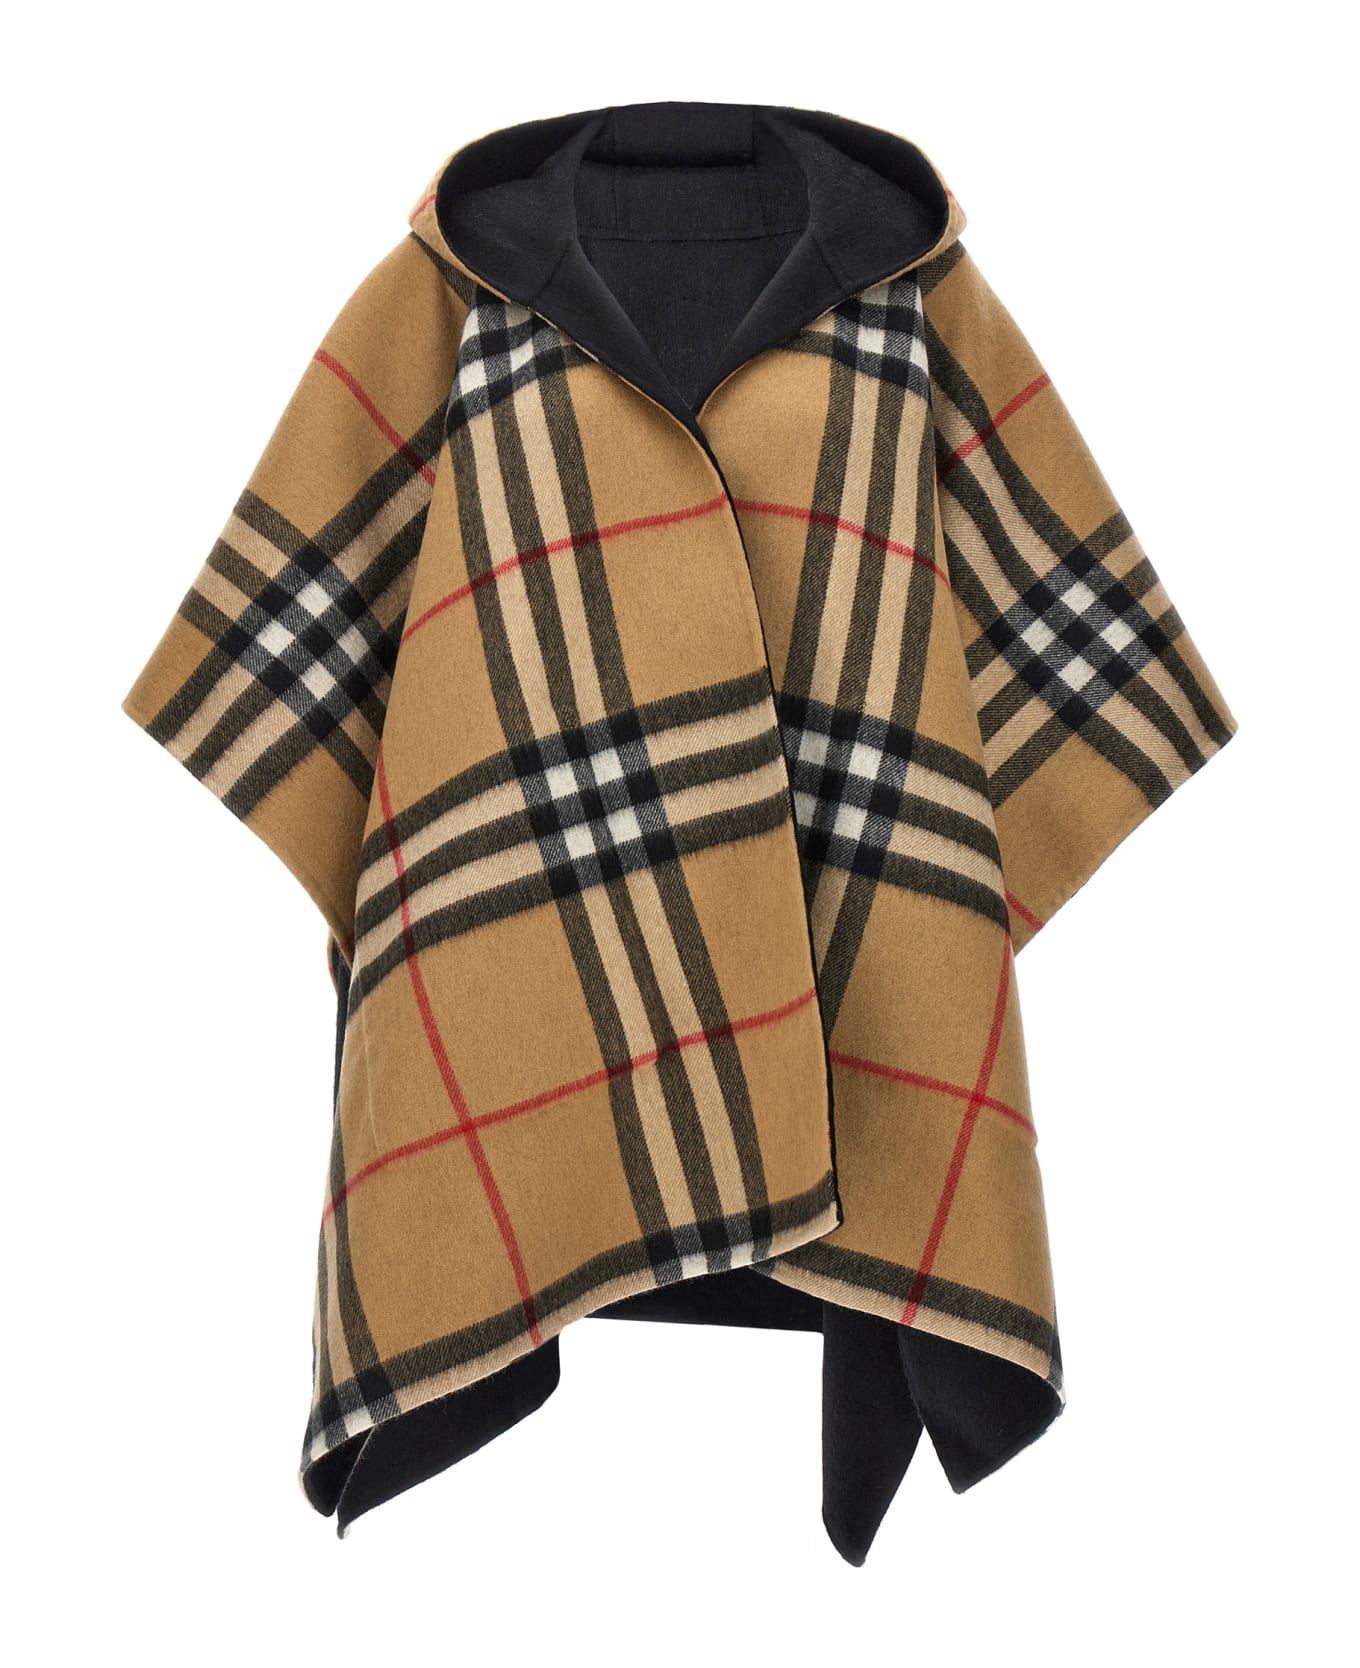 Burberry Reversible Hooded Cape - Multicolor